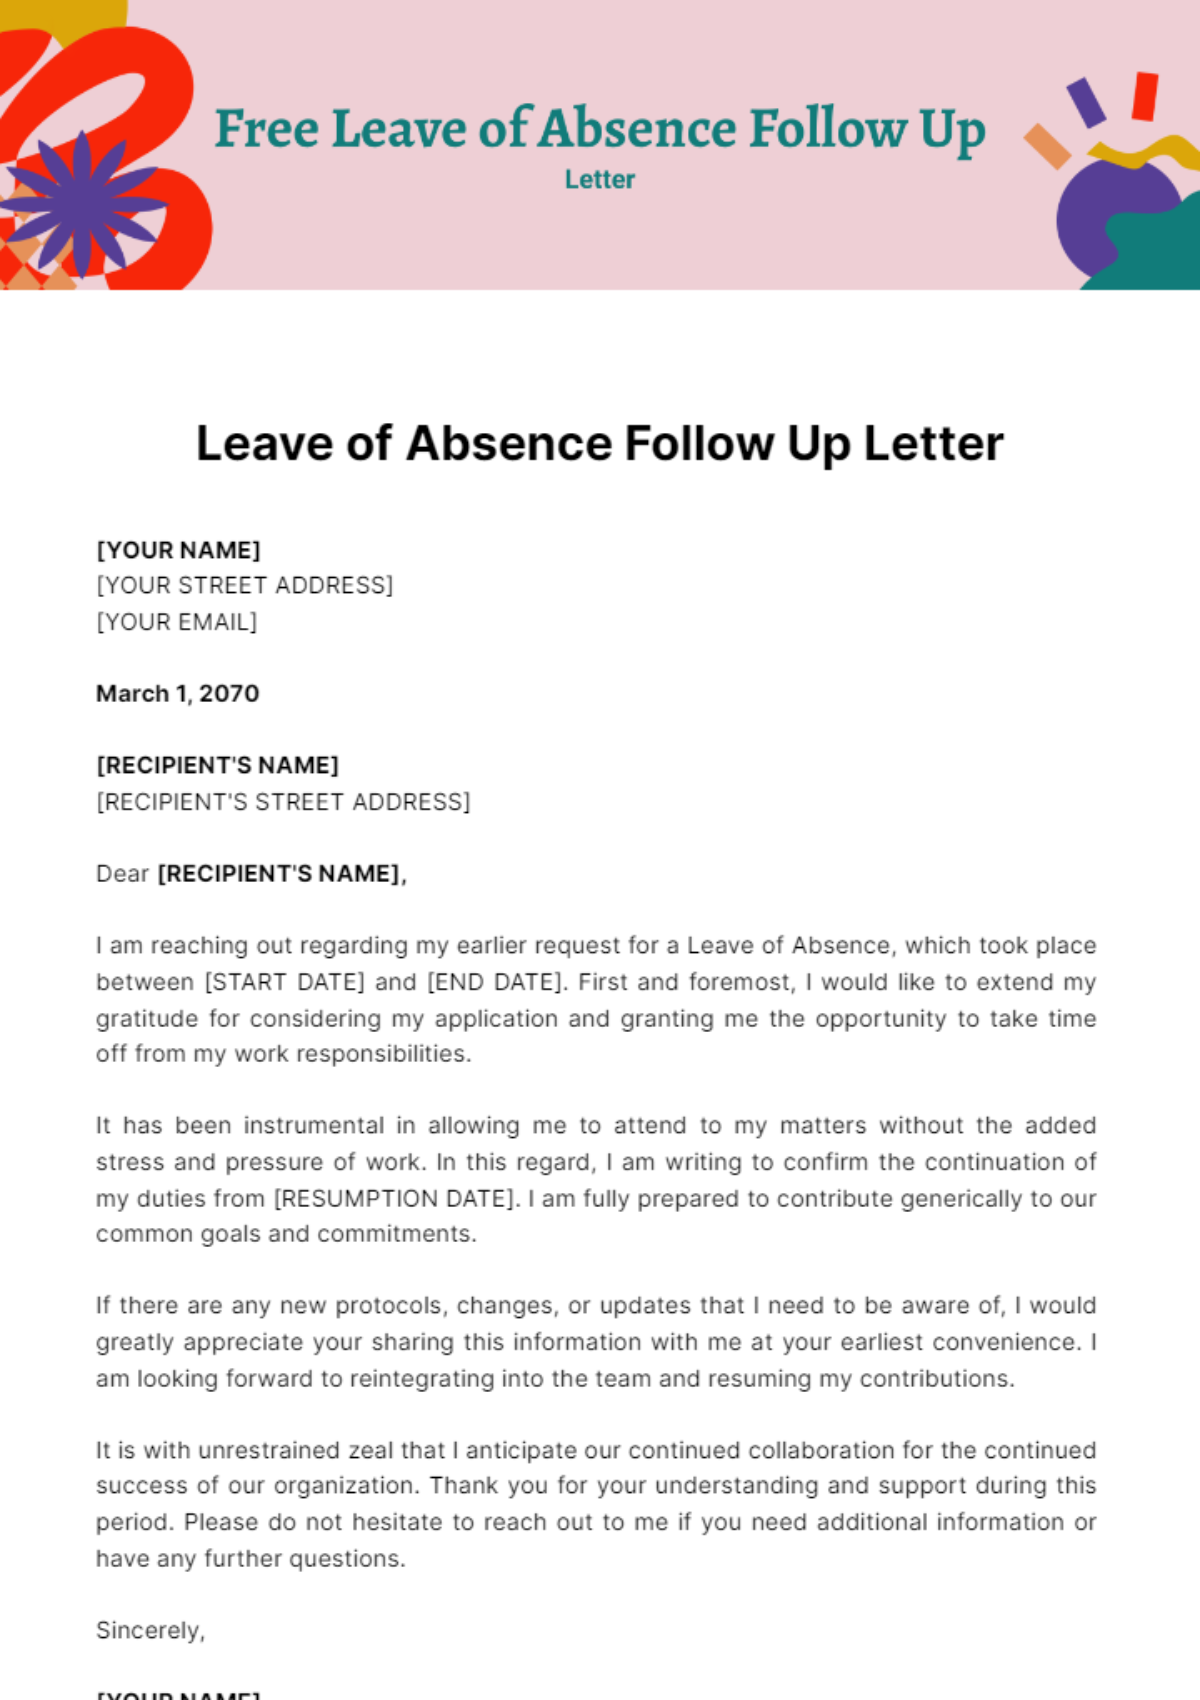 Free Leave of Absence Follow Up Letter Template